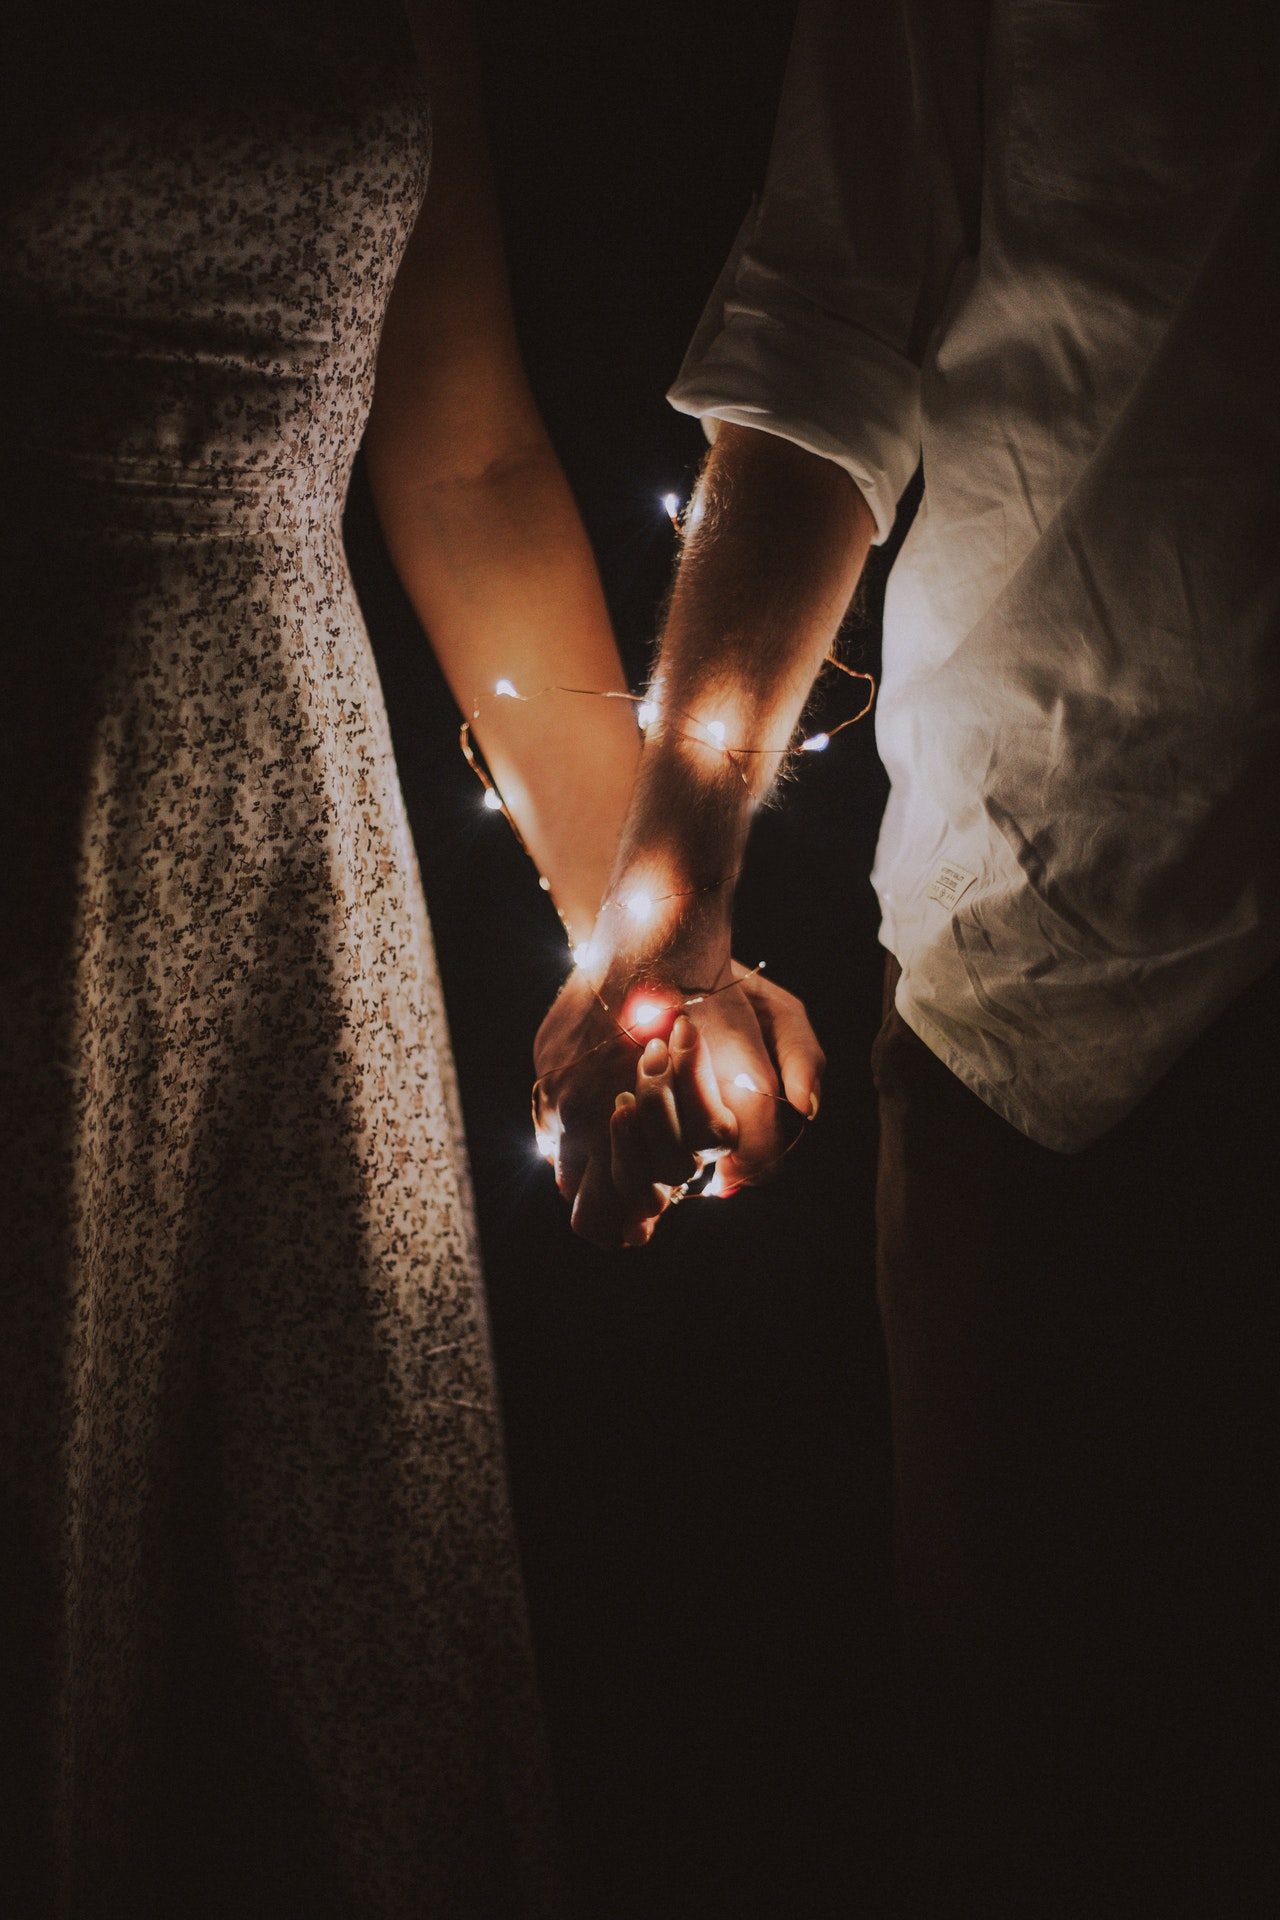 Photo by Anastasiya Lobanovskaya from Pexels https://www.pexels.com/photo/man-and-woman-holding-each-others-hand-wrapped-with-string-lights-792777/